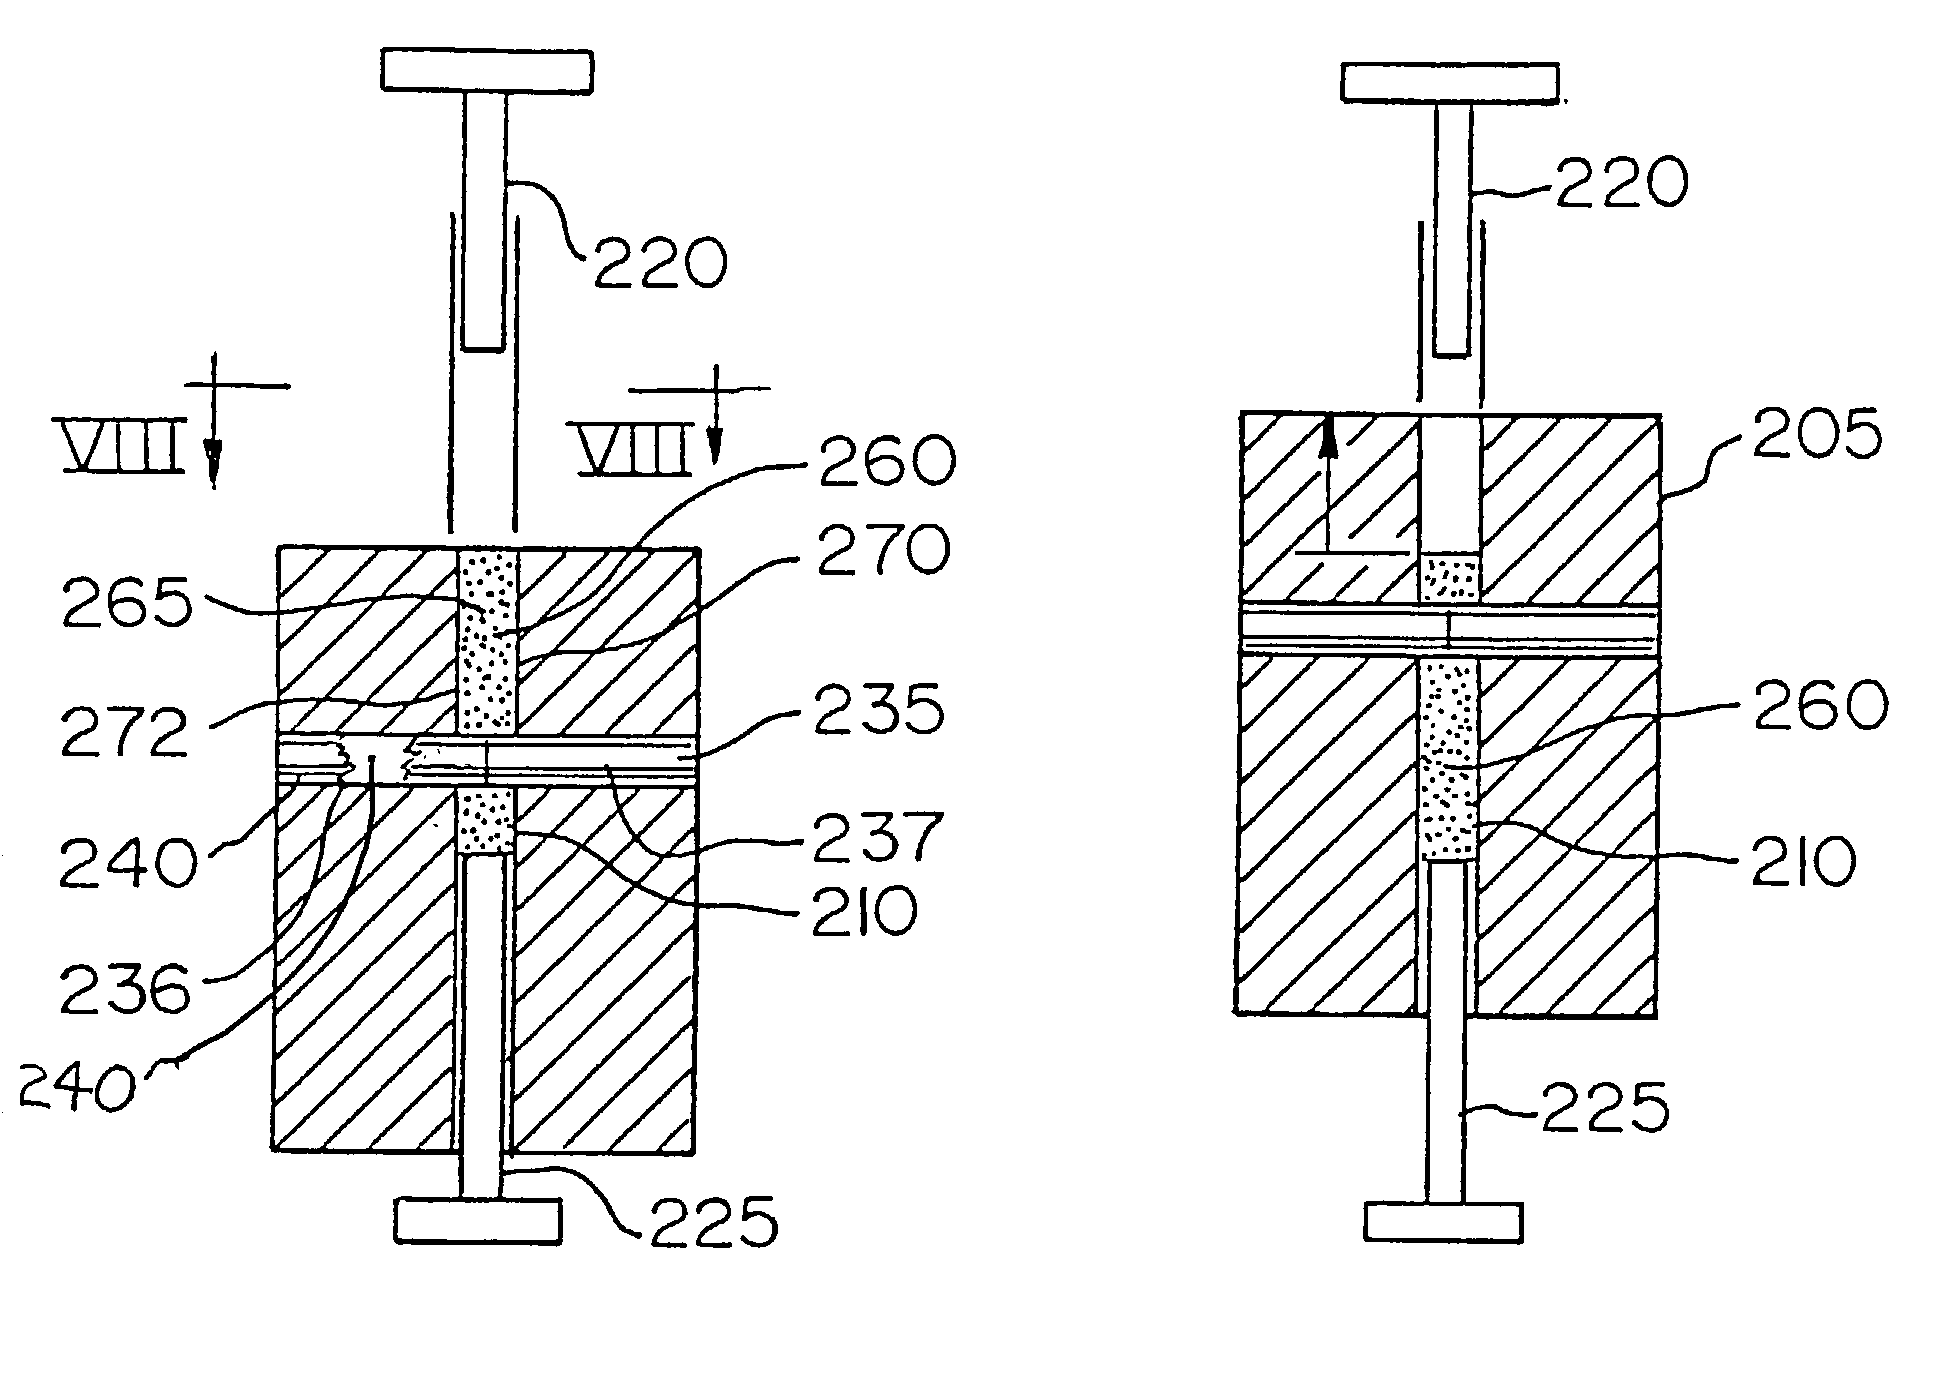 Method and apparatus for cross-hole pressing to produce cutting inserts